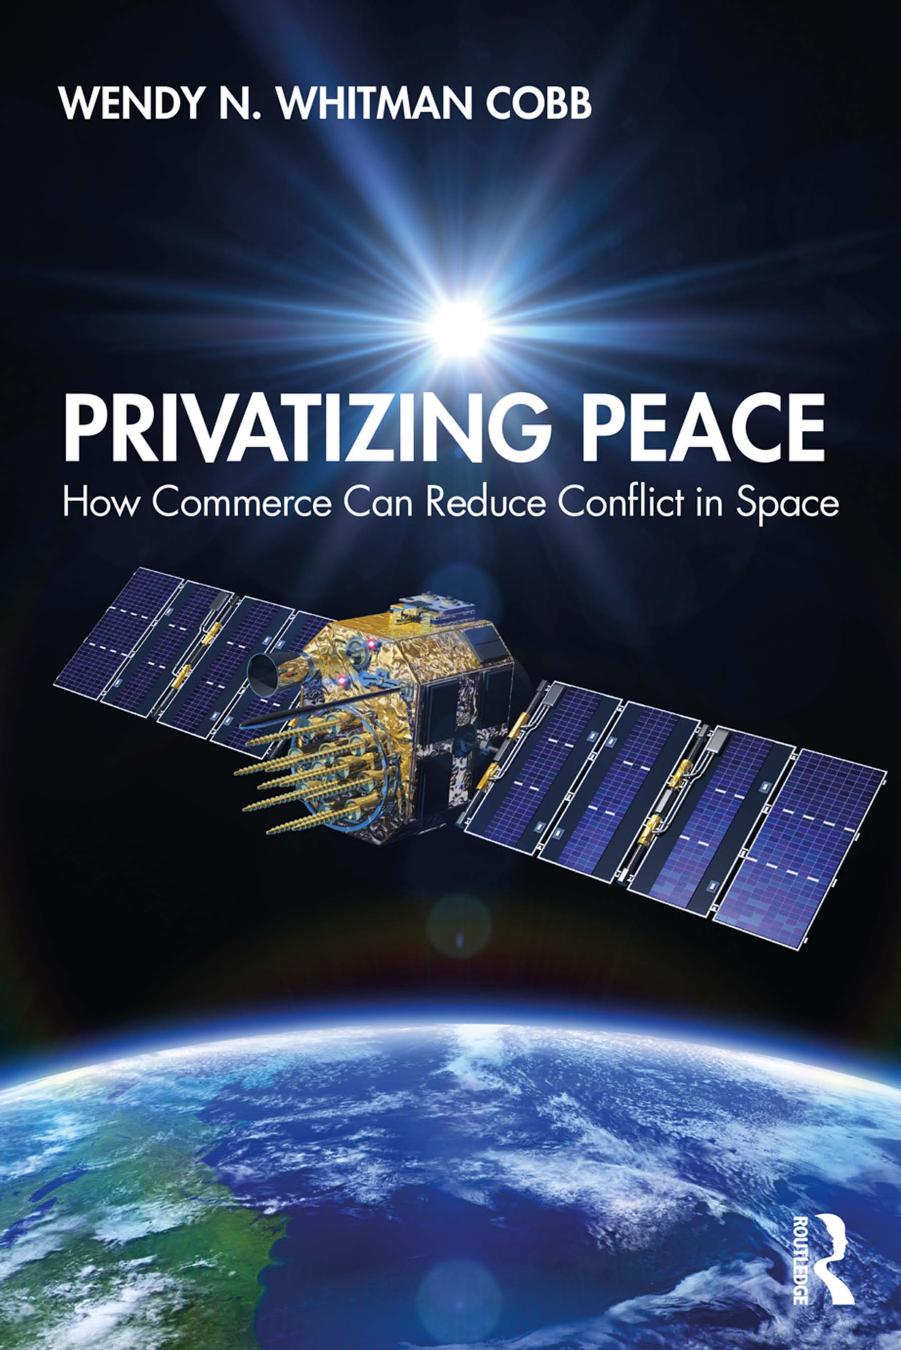 Privatizing Peace: How Commerce Can Reduce Conflict in Space by Wendy N. Whitman Cobb